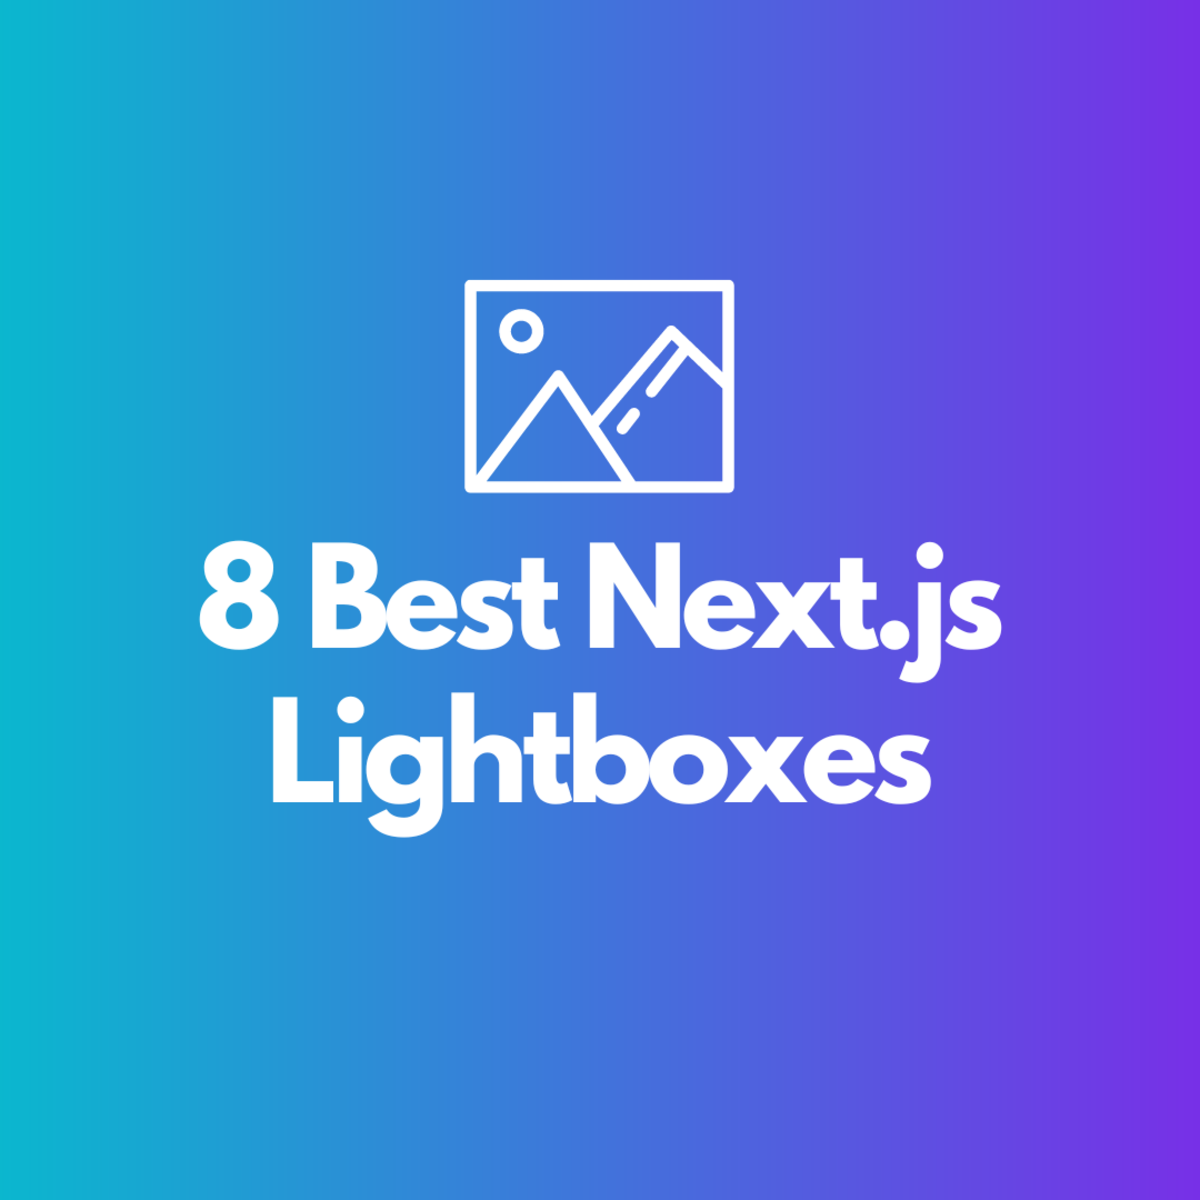 8 Best Next.js Lightboxes to Check Out: The Ultimate List